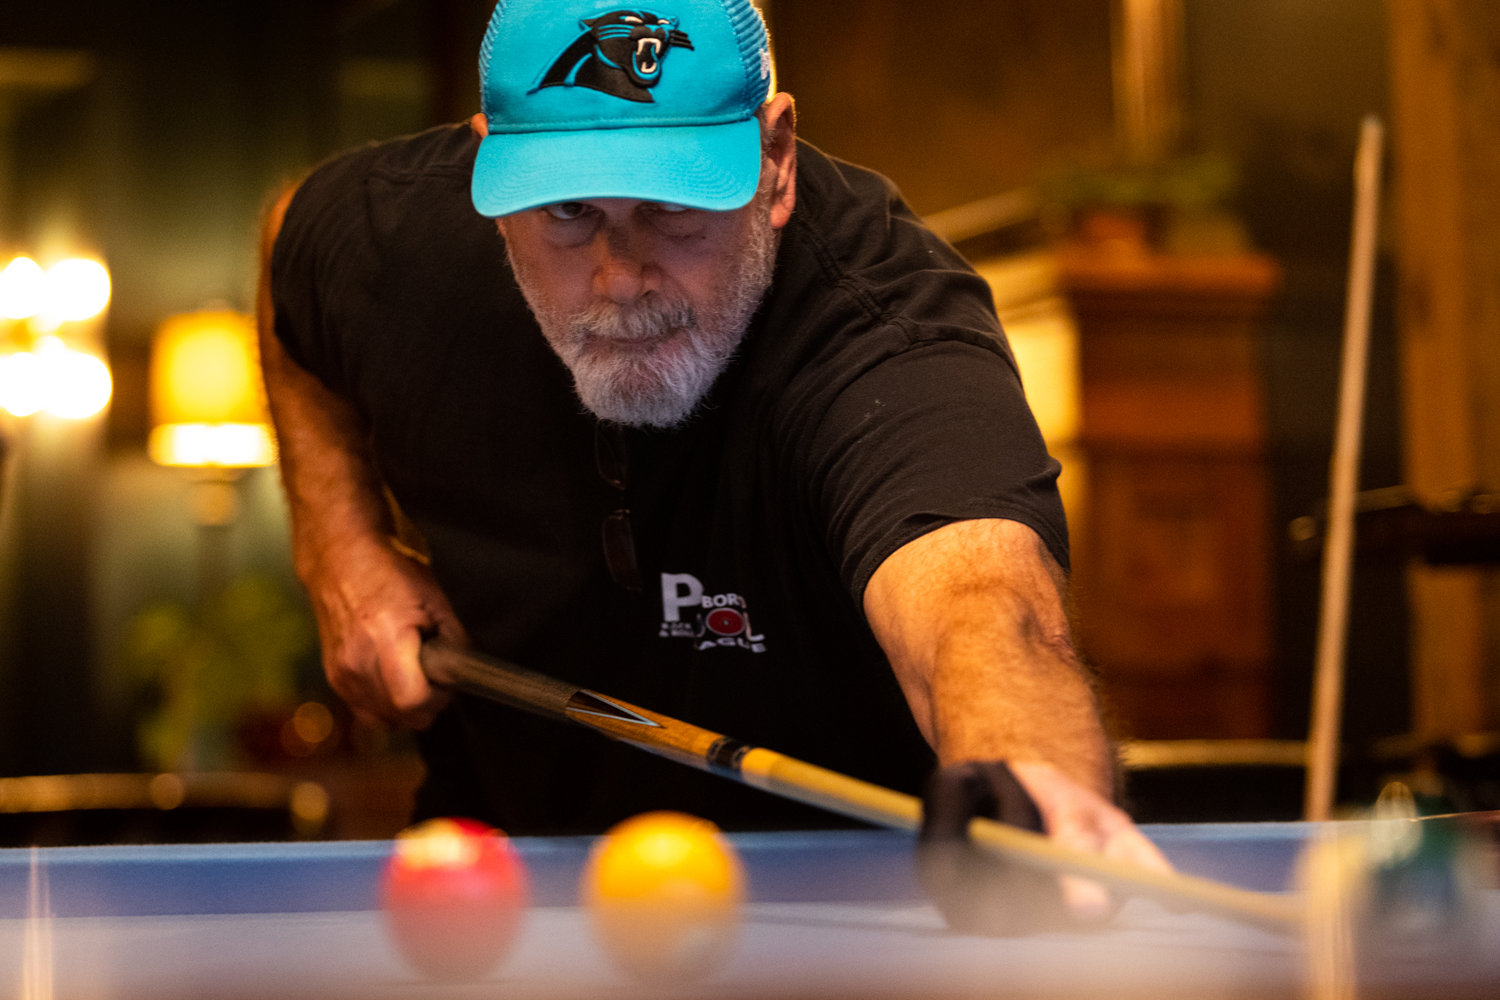 Bruce Hively, member of the Pittsboro Pool League, lines up a shot during a match against Antonio Sloan at The Sycamore at Chatham Mills.